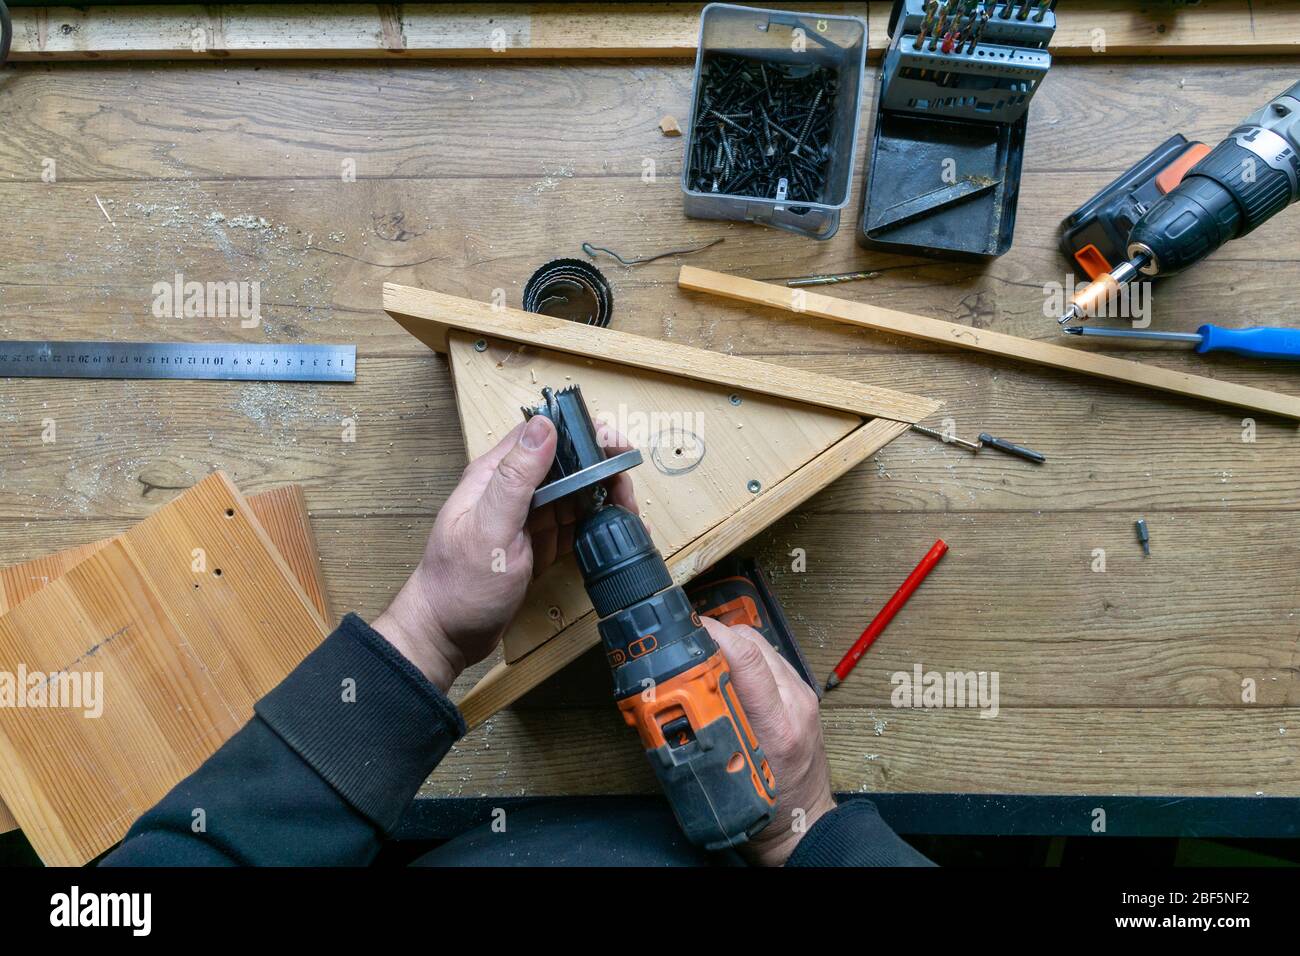 build birdhouse, wood, screws and tools lying on the bench Stock Photo